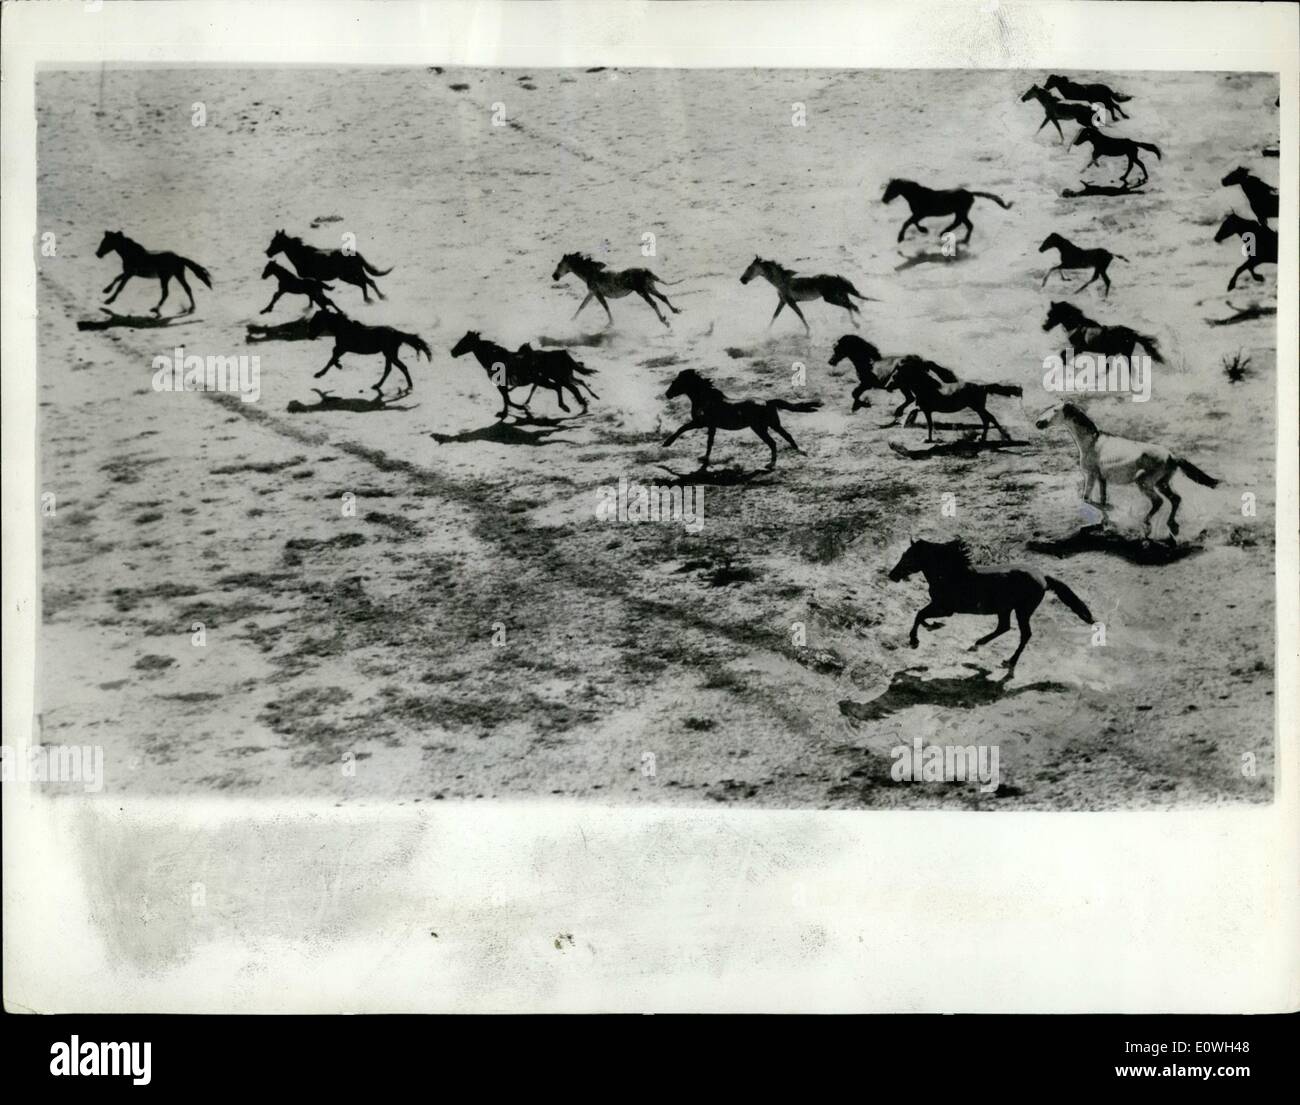 Dec. 12, 1962 - Austrakian death round-up 4,000 horses for slaughter.: The biggest horse slaughter in Australian history has begun. Four thousand wild horses - some with foals - are being brought to Sydney - where they will be killed for pet food. Planes - motorcycles and horsemen will be used to round them up on 4375 square mile Bulloo Downs, the roans - piebalds and proud blacks - will be herded in the morning and evening when they come down from the hills for water. The plan a will stampede them for 20 miles until they become footsore and tired Stock Photo